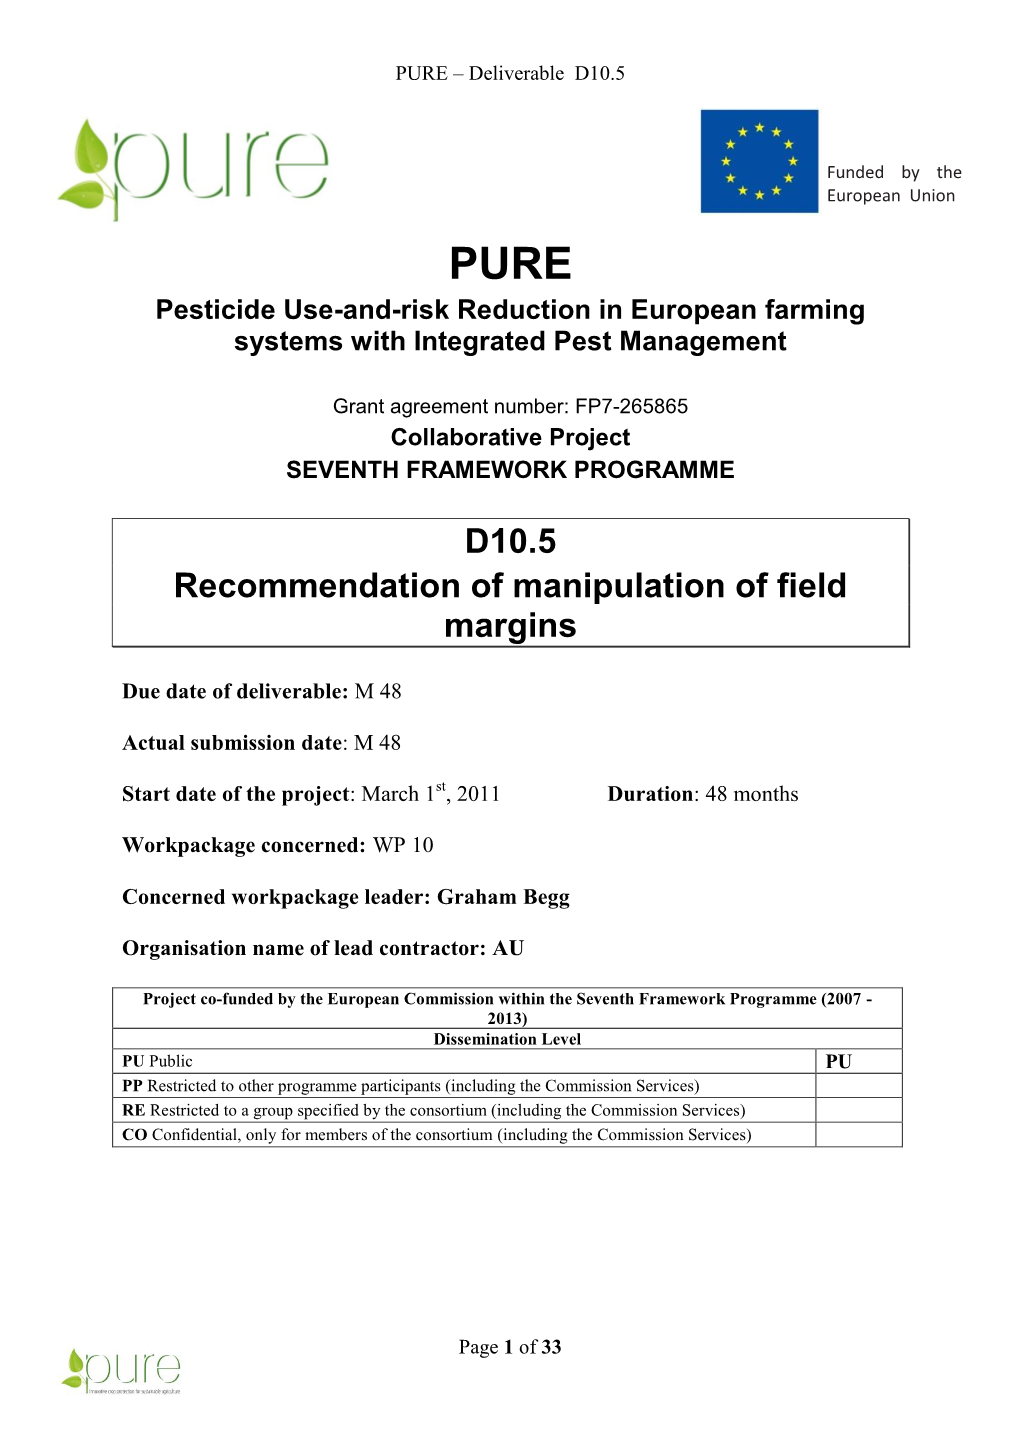 D10.5 Recommendation of Manipulation of Field Margins